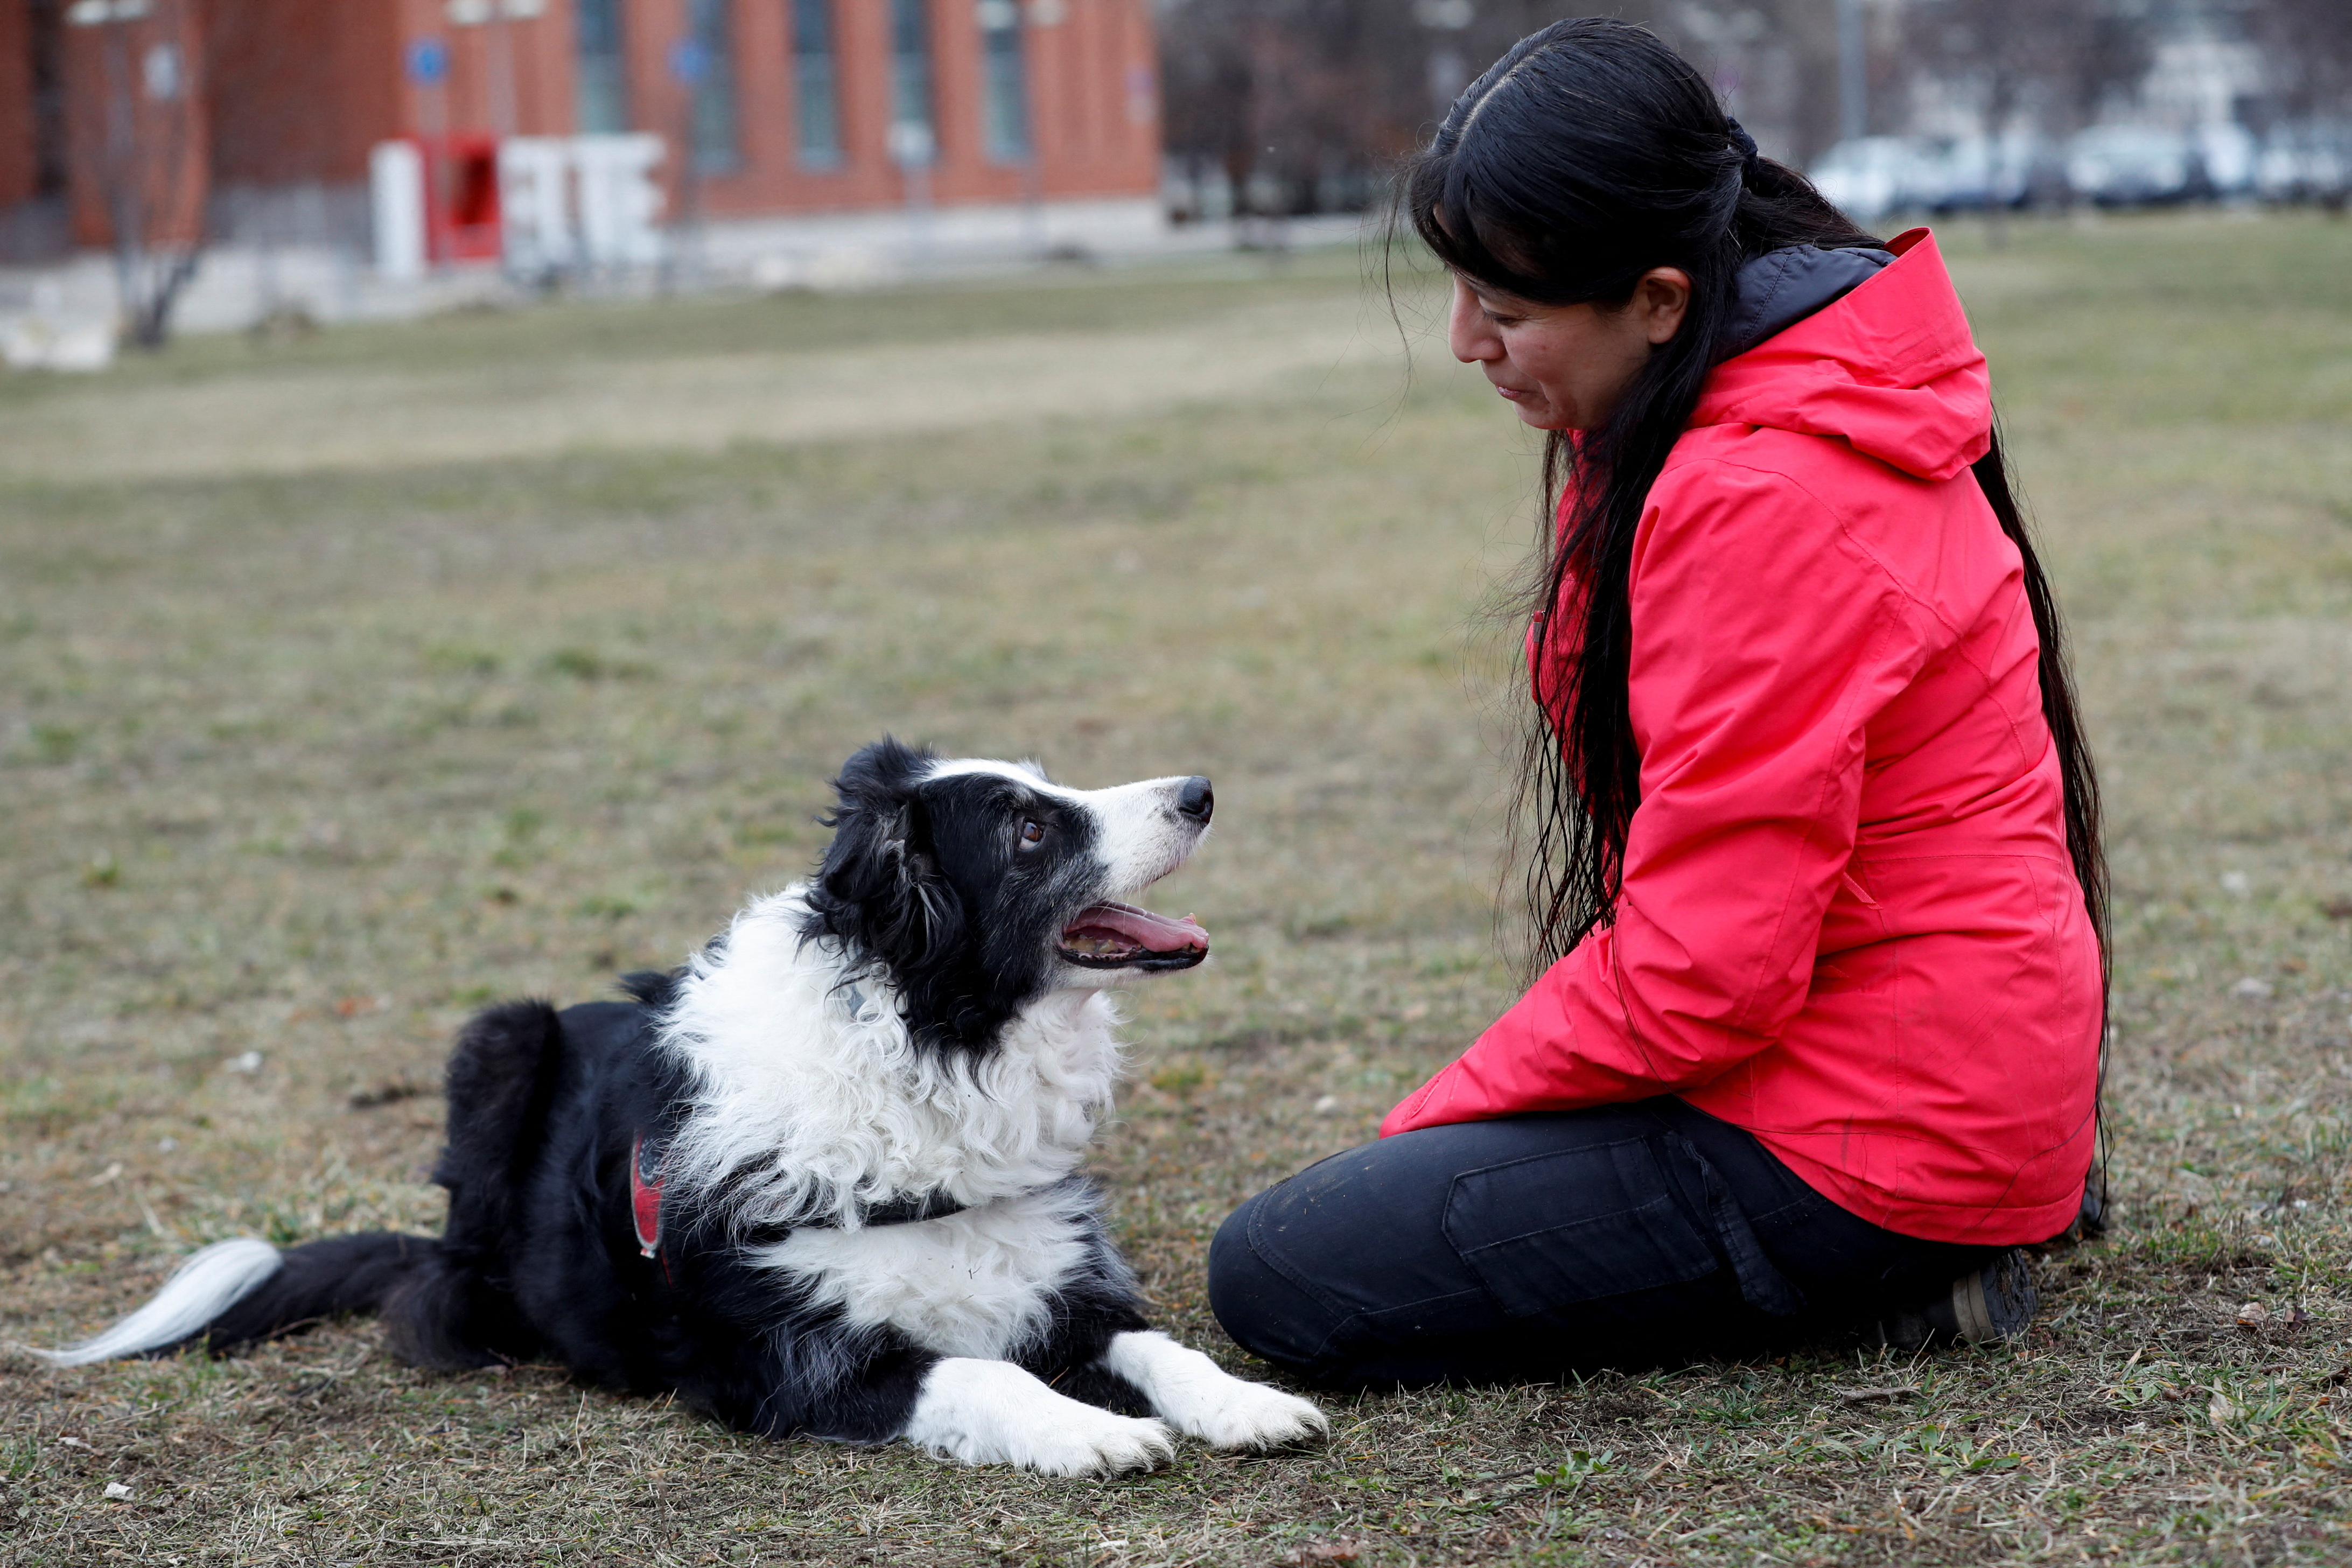 Postdoctoral researcher Laura V. Cuaya talks to her dog Kun-kun, an 8-year-old Border Collie, at the Ethology Department of the Eotvos Lorand University in Budapest, Hungary, January 5, 2022. REUTERS/Bernadett Szabo